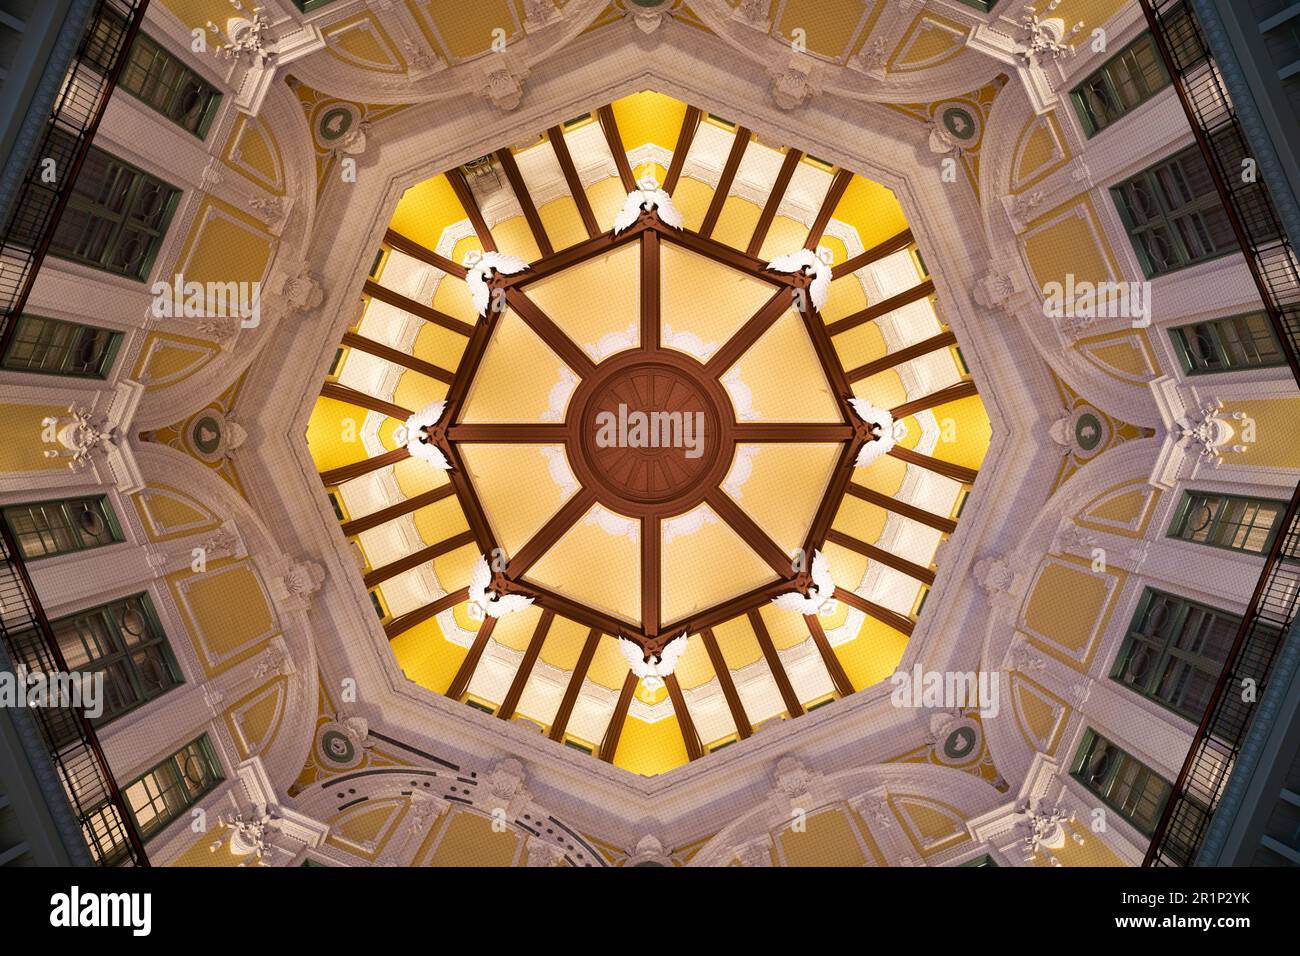 An interior shot of a domed structure, featuring large windows and yellow walls in the background Stock Photo